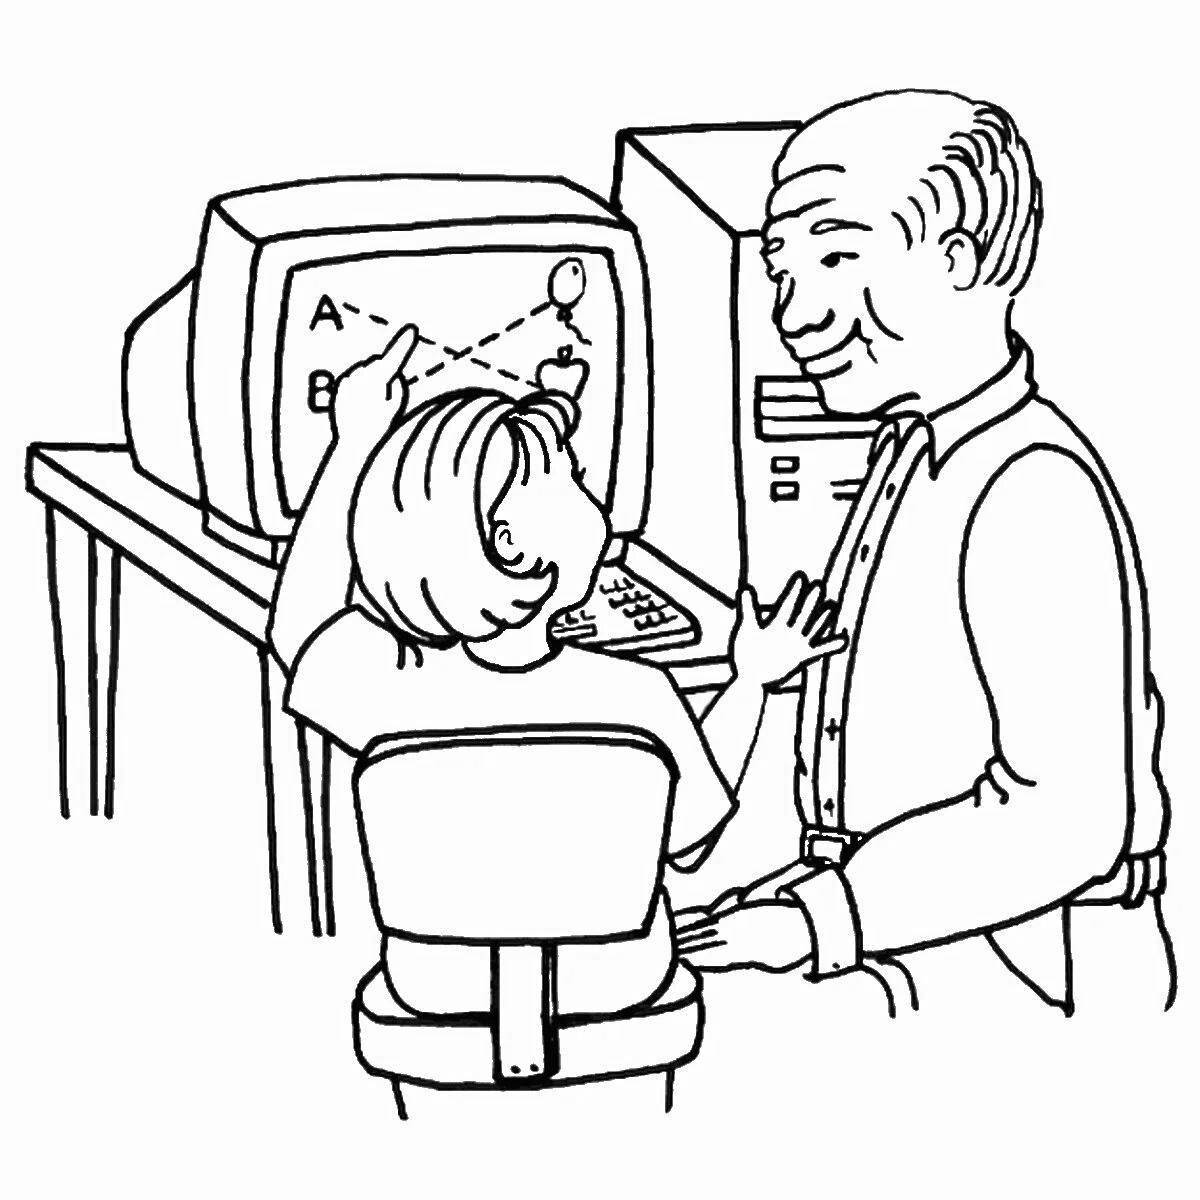 Coloring book cheerful child and computer